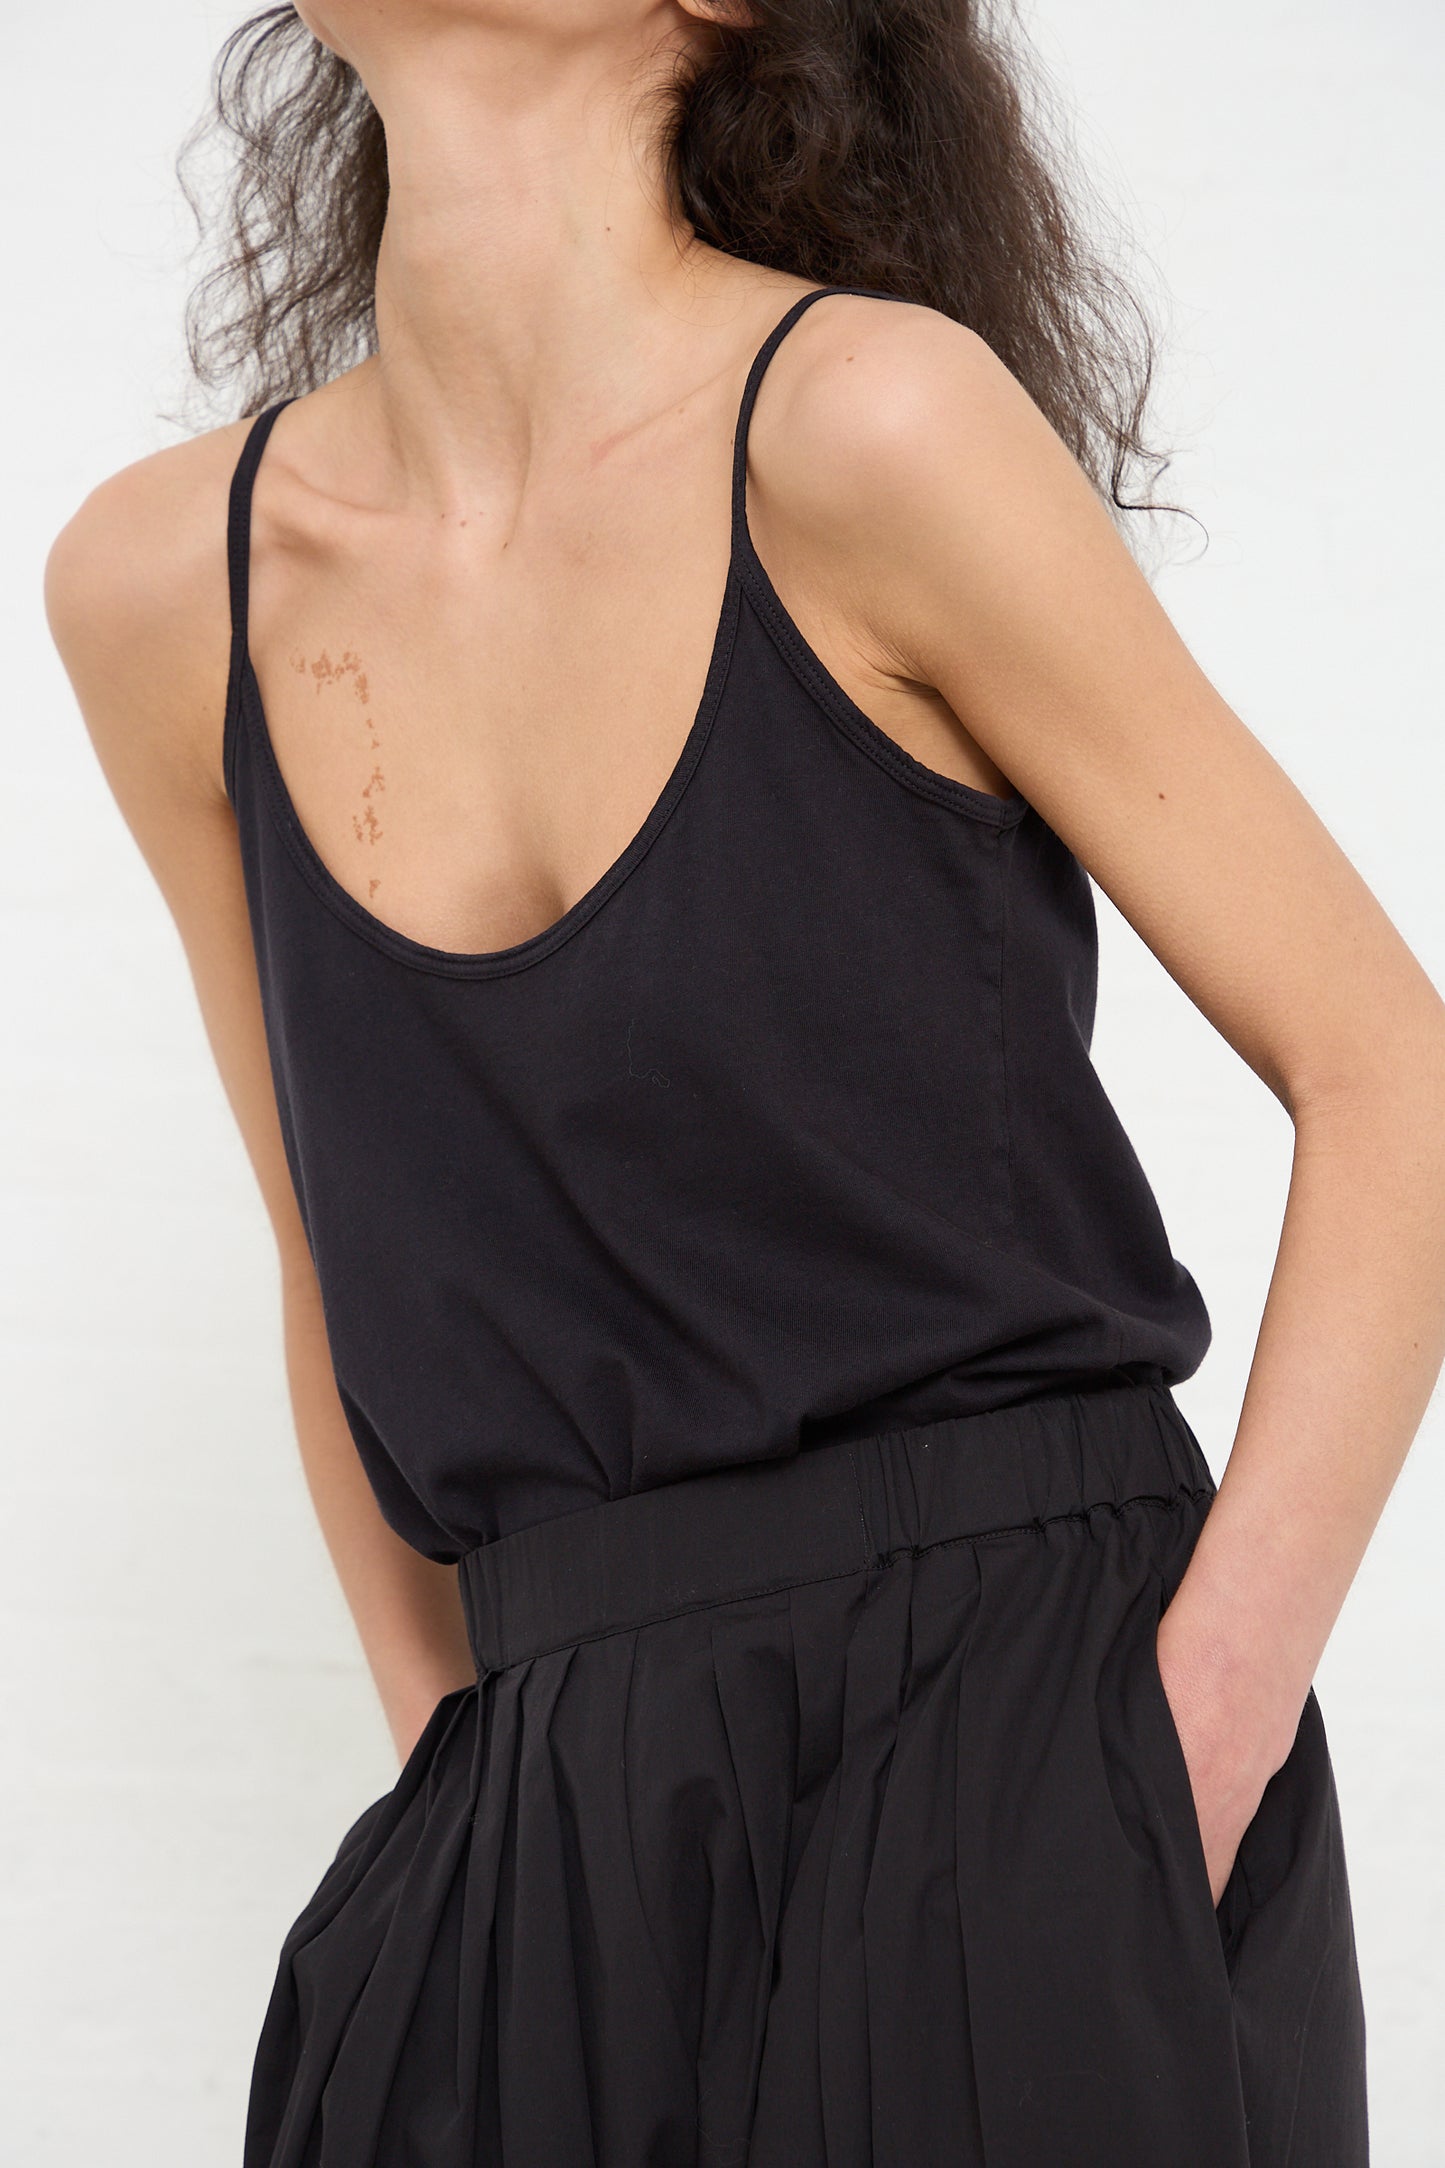 A person in a Black Crane black organic cotton jersey camisole top and pleated skirt poses with one hand on hip, showcasing the outfit against a plain background.